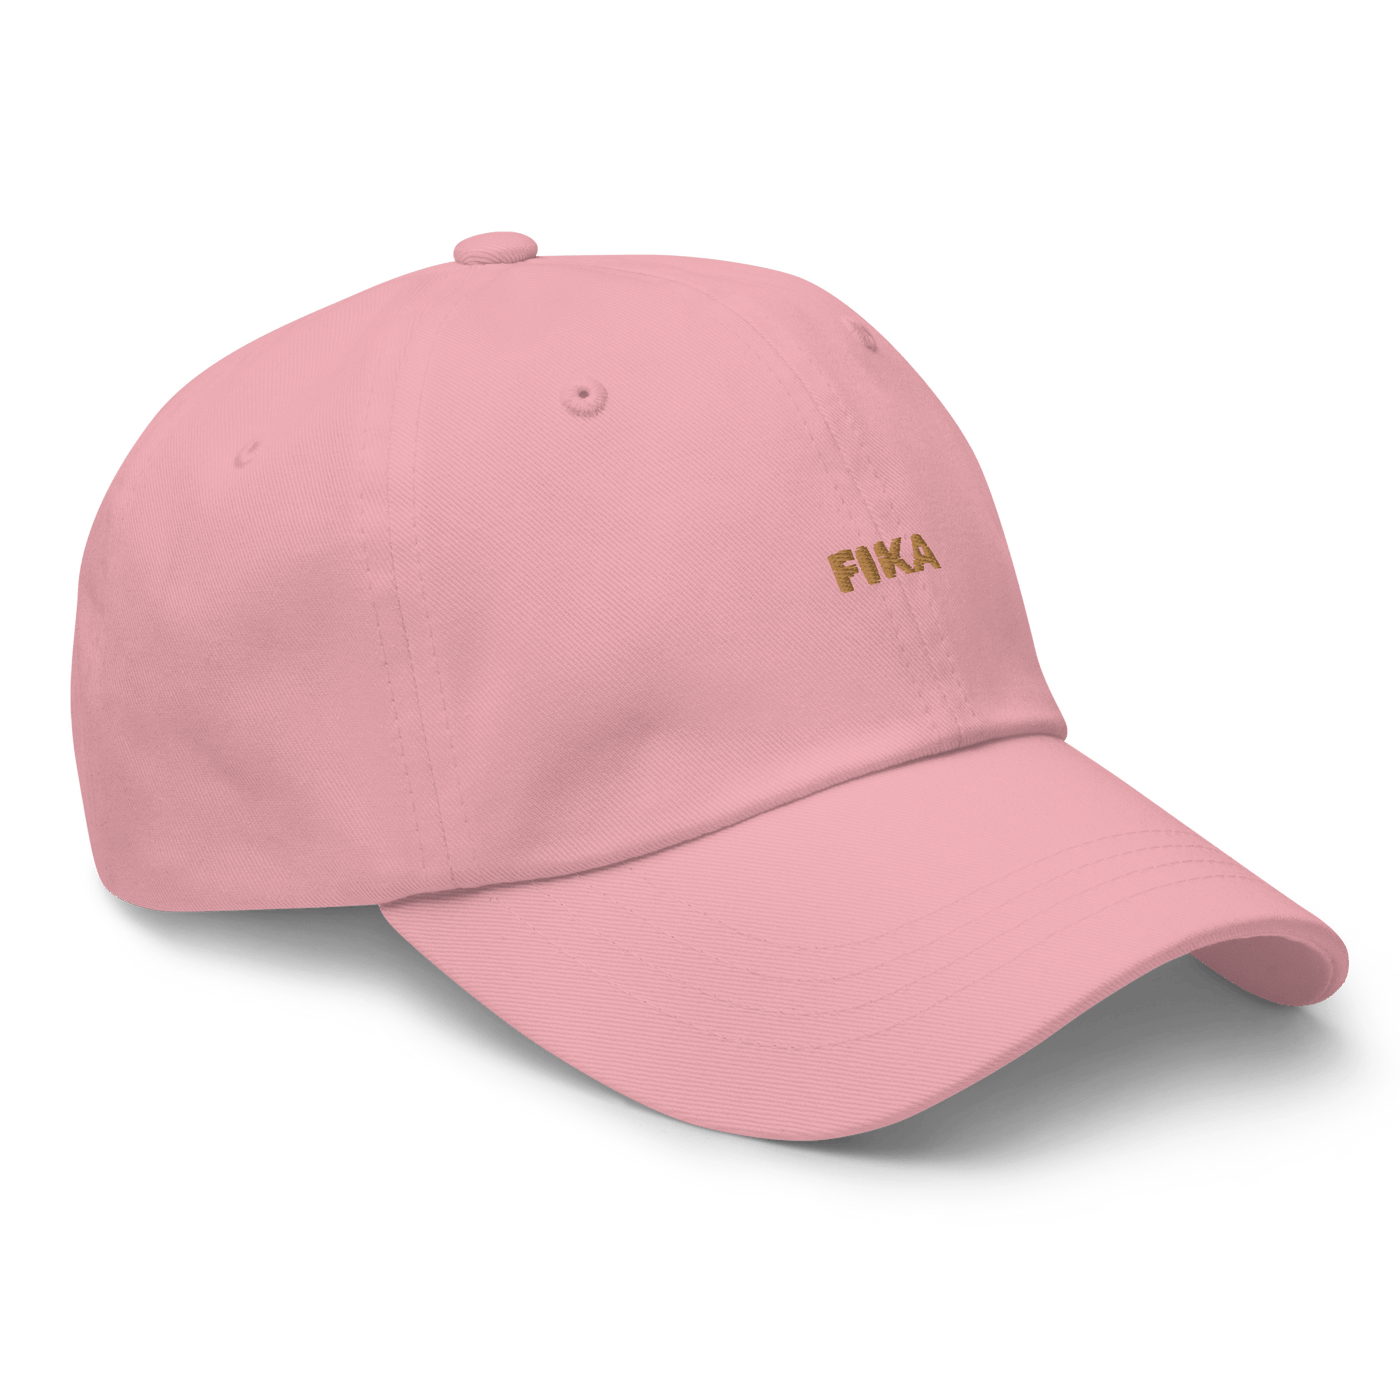 FIKA Dad hat - Pink - - Just Another Cap Store